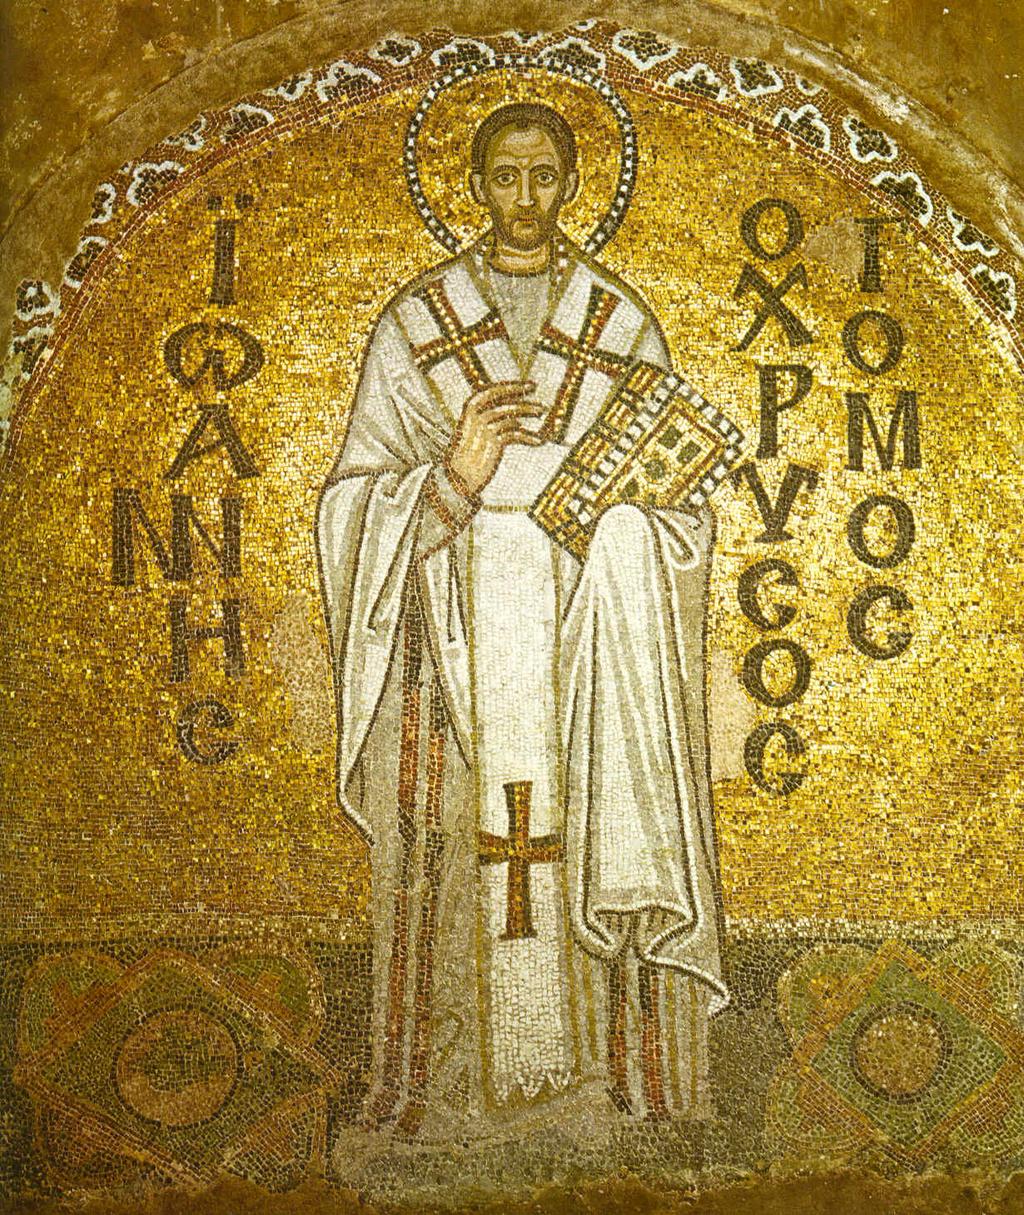 St John Chrysostom s Homily on Christmas Morning BEHOLD a new and wondrous mystery. My ears resound to the Shepherd s song, piping no soft melody, but chanting full forth a heavenly hymn.